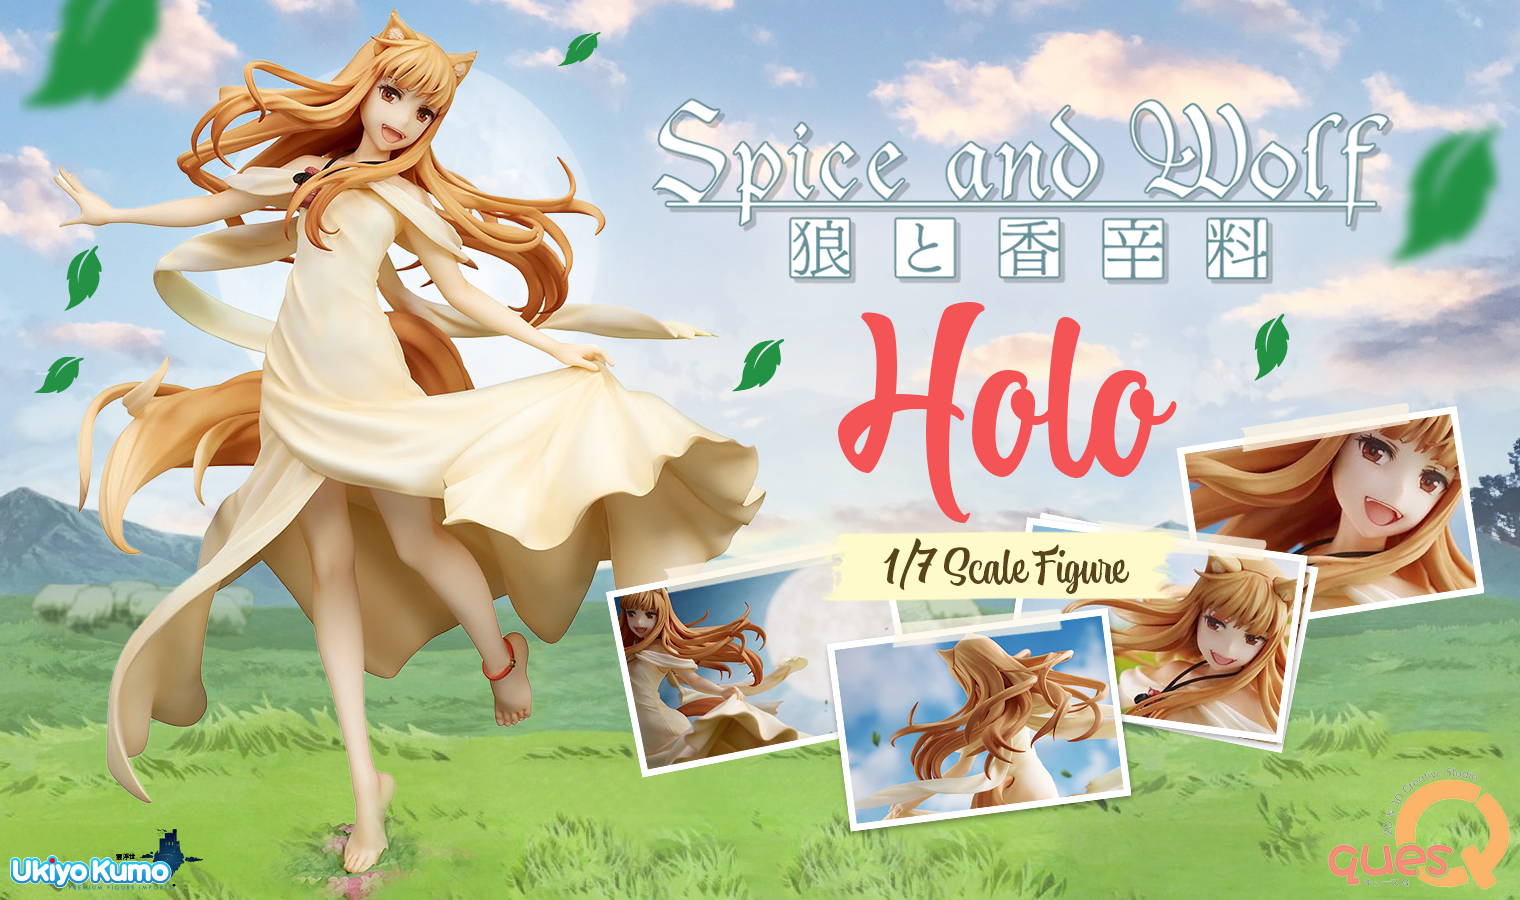 Spice And Wolf: Holo 1/7 Scale Figure